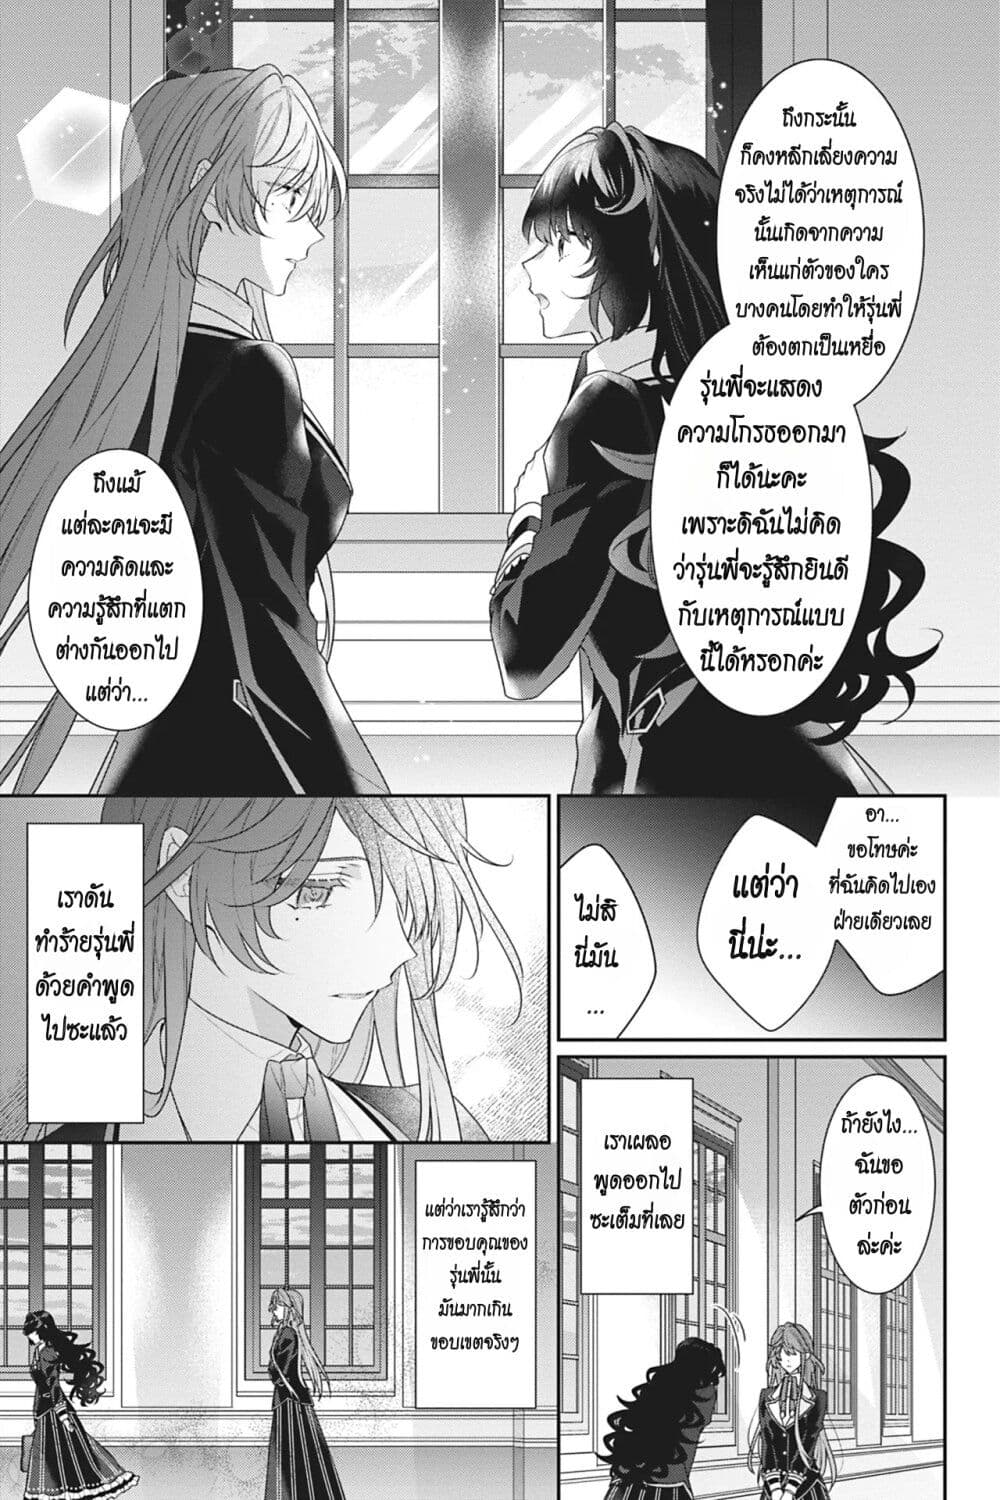 I Was Reincarnated as the Villainess in an Otome Game but the Boys Love Me Anyway! เกิดใหม่เป็นนางร้าย แต่เป้าหมายการจีบสุดจะไม่ปกติ !! 11-11